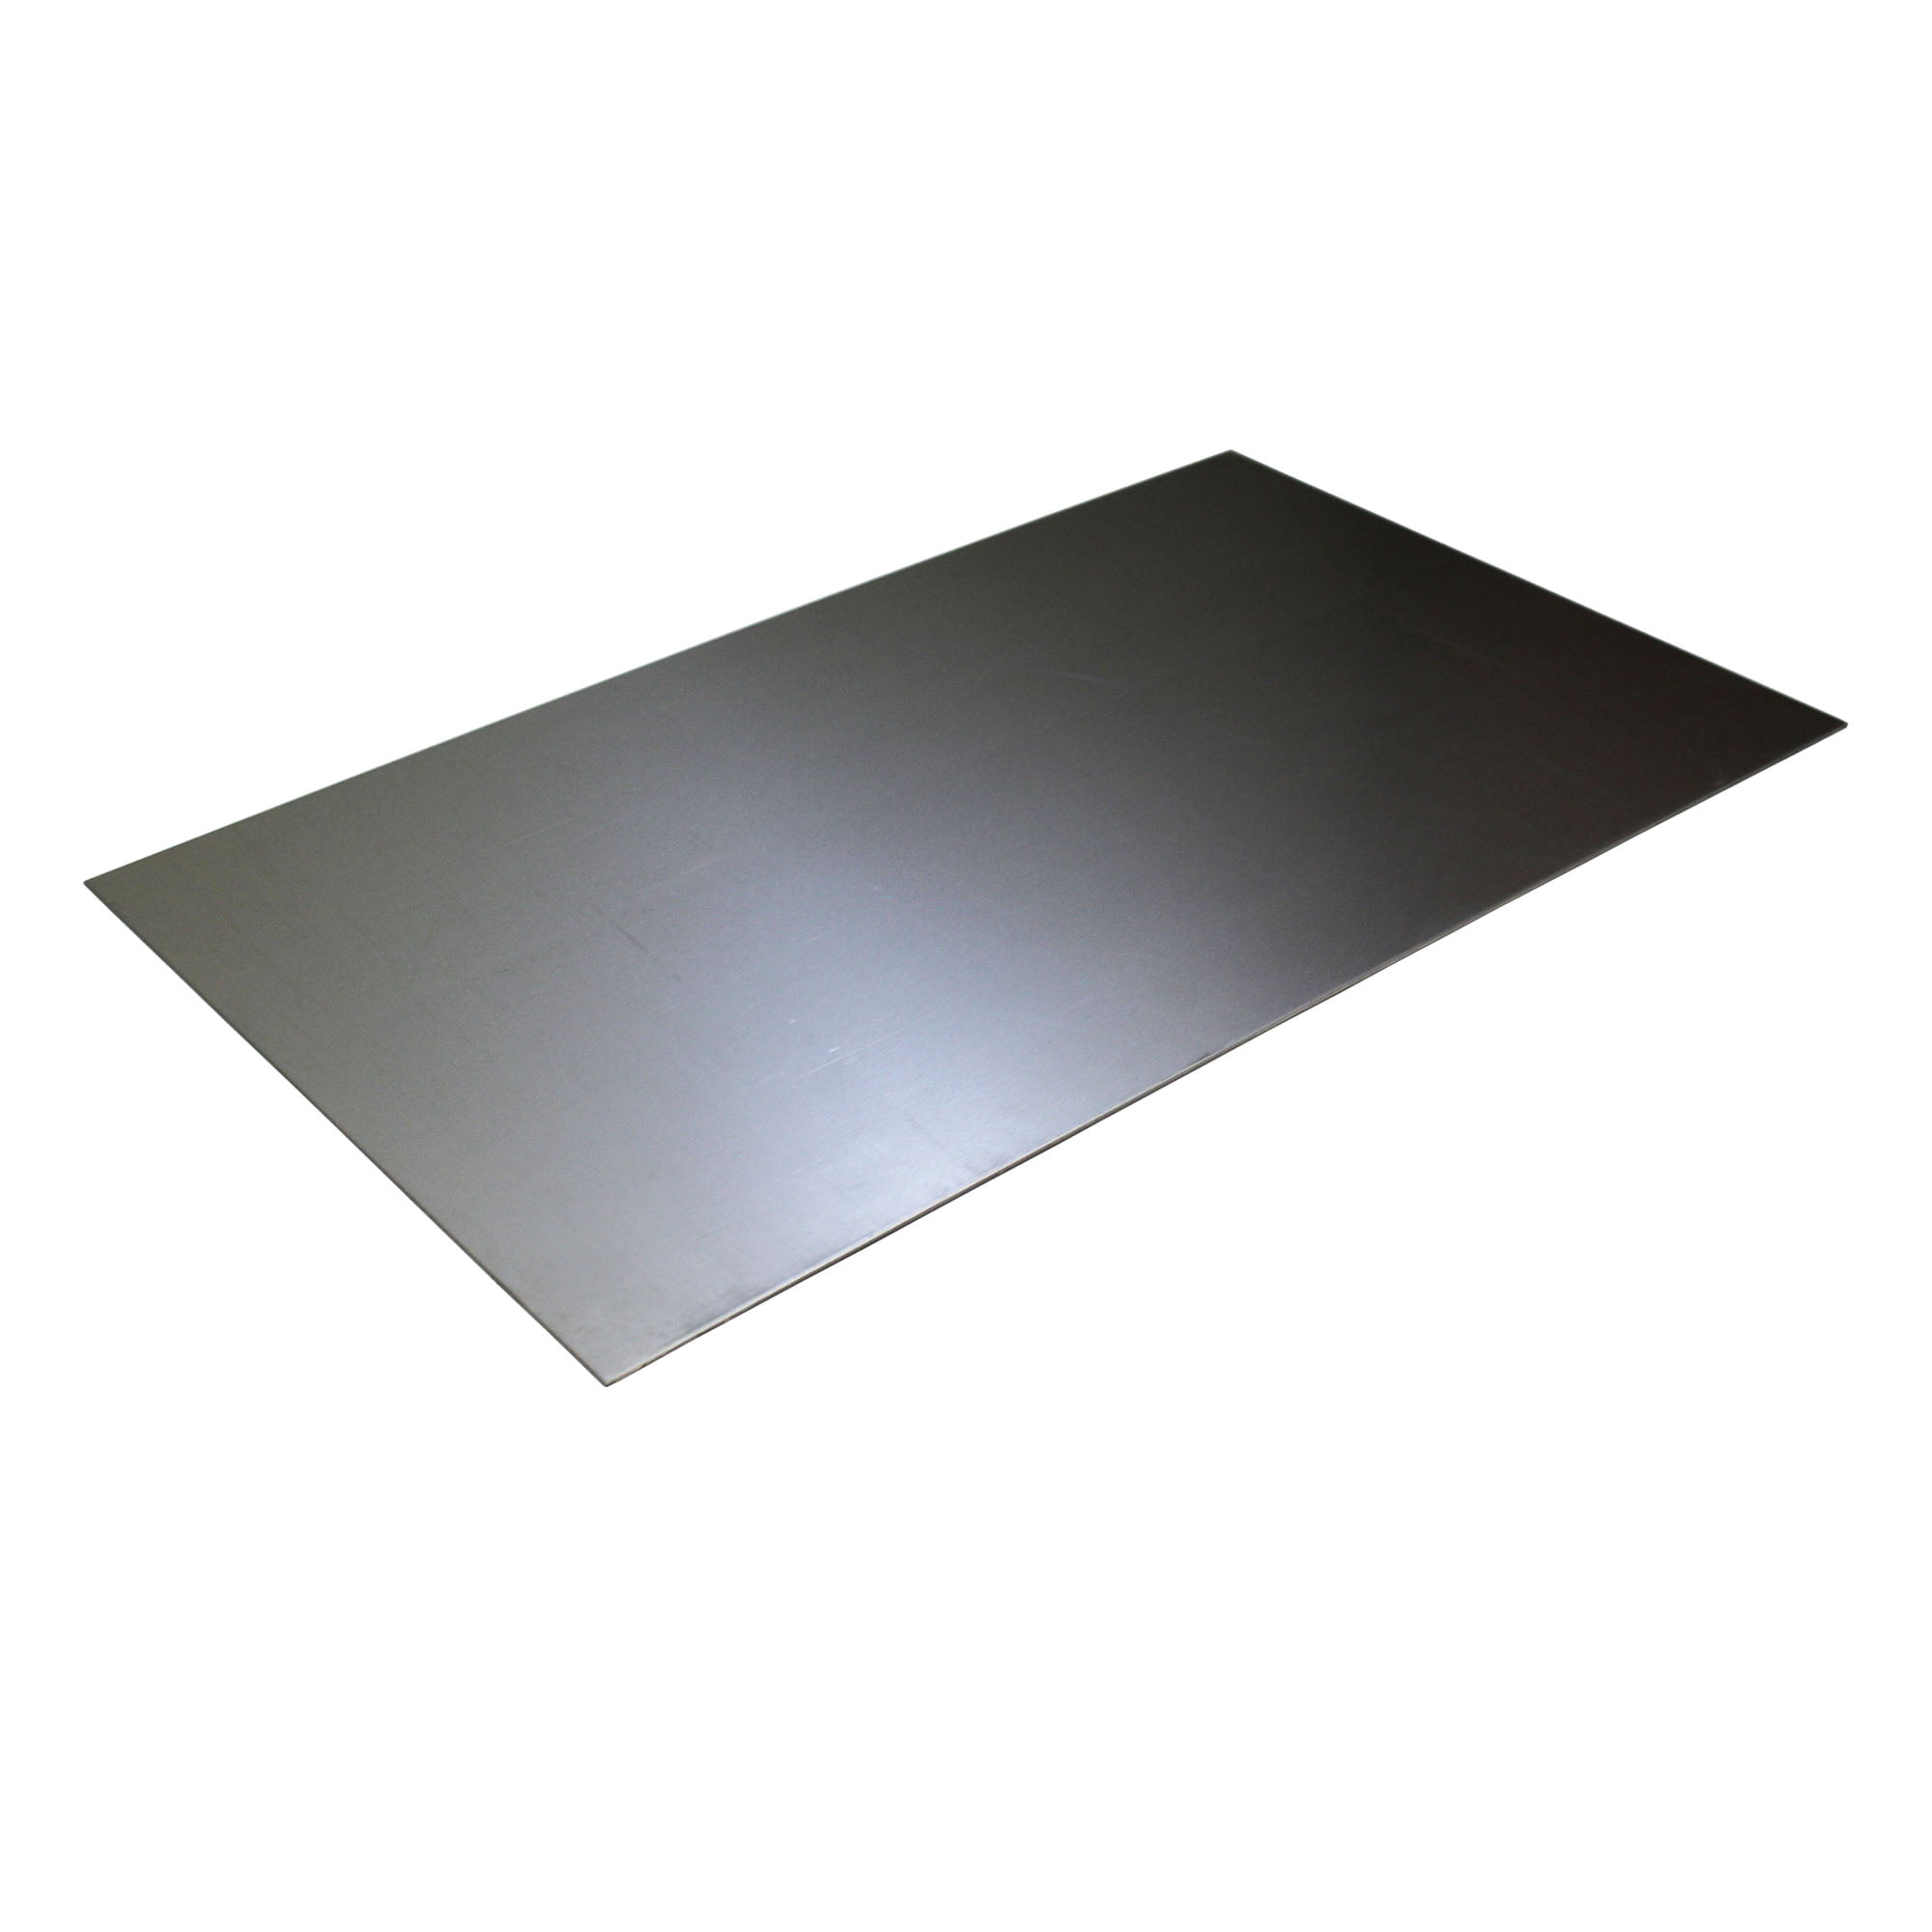 Mild Steel Plate Cut To Size